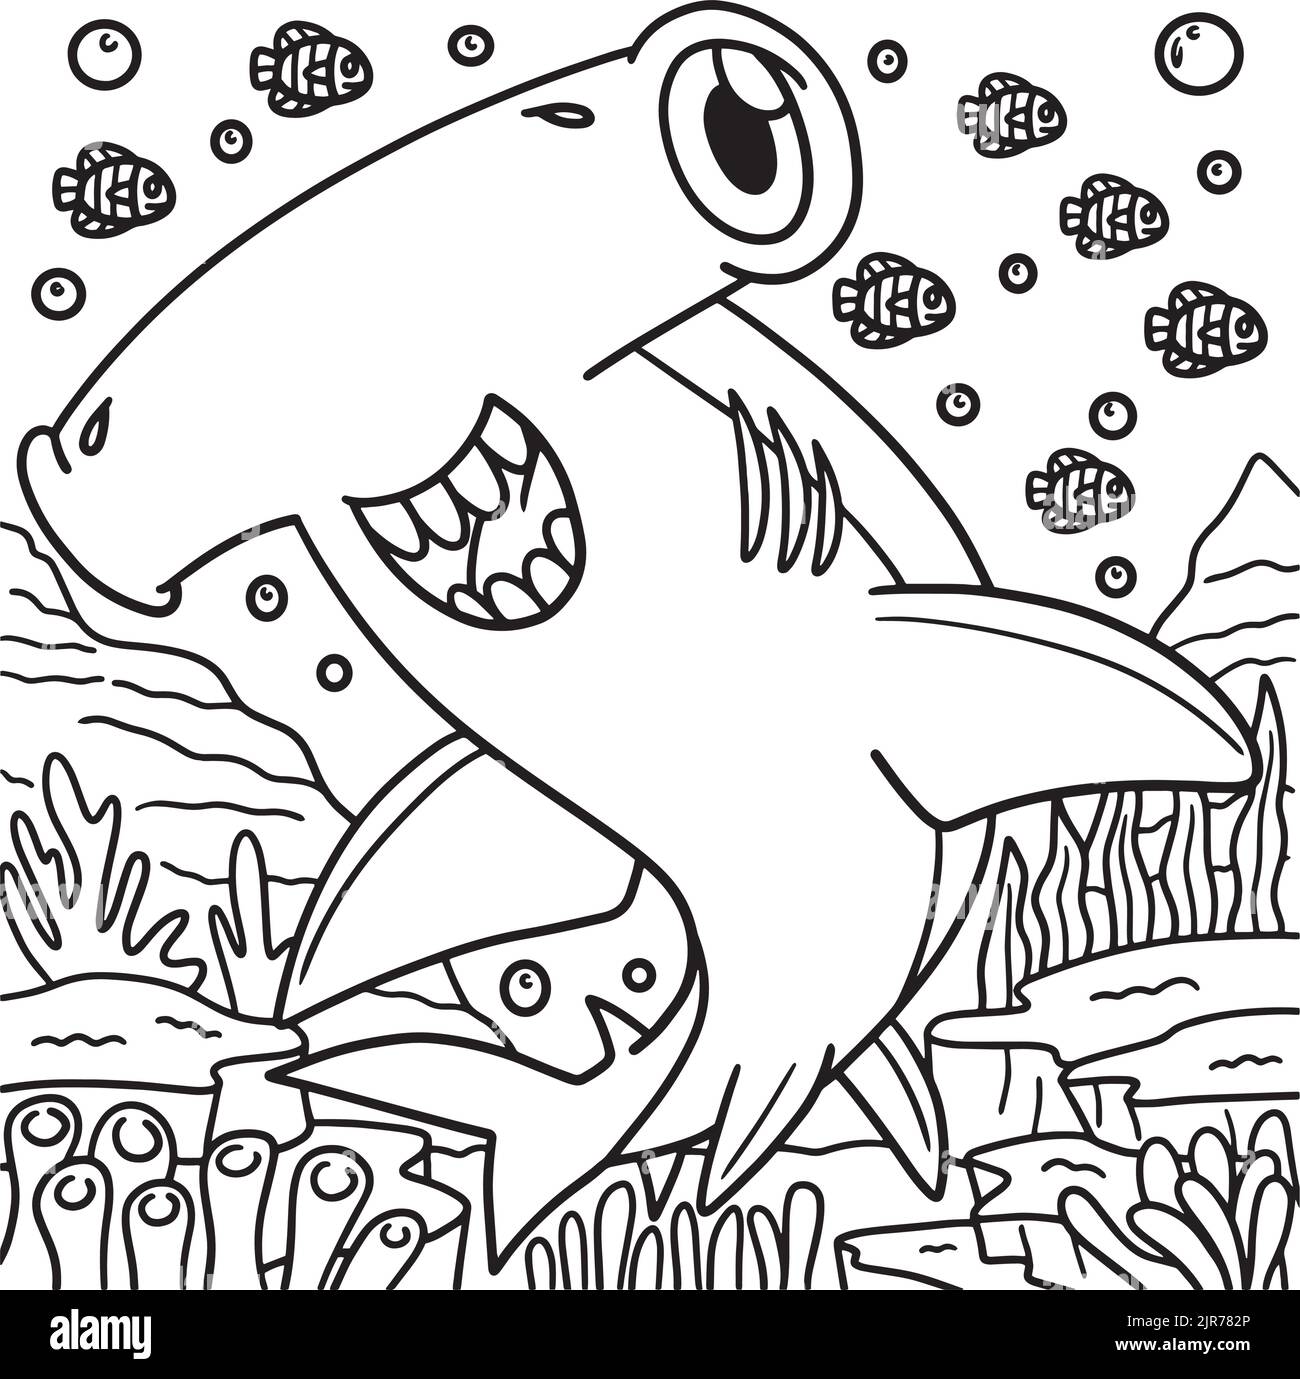 Hammerhead Shark Coloring Page for Kids Stock Vector